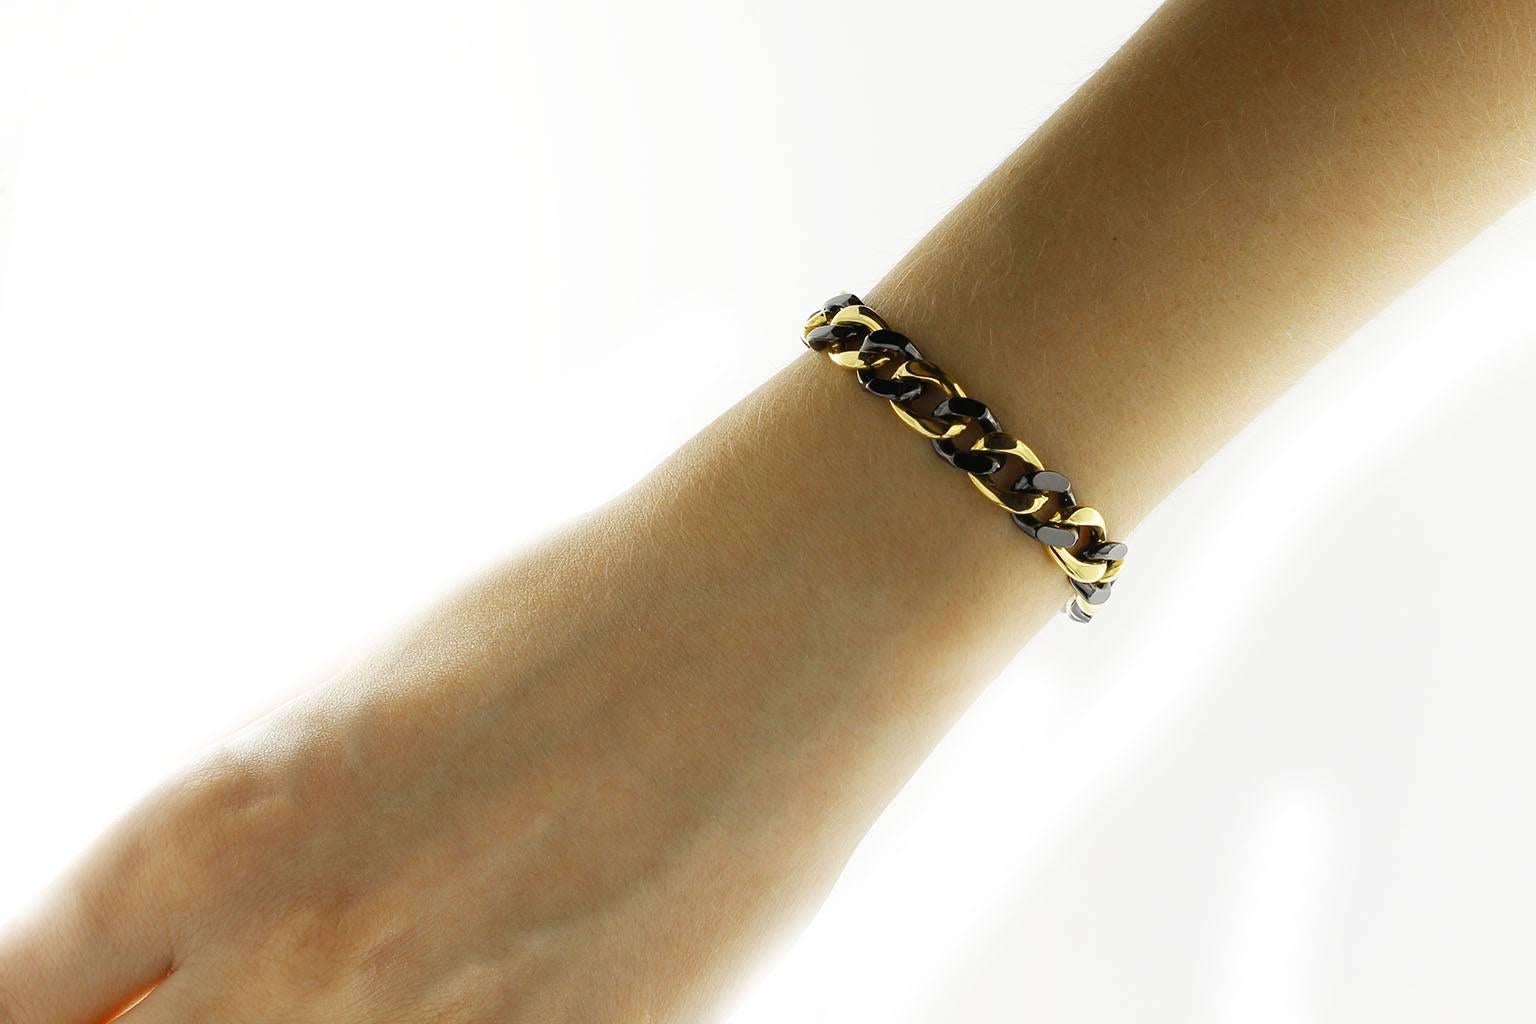 Jona design collection, hand crafted in Italy, alternating 18k yellow gold and black high-tech ceramic curb-link bracelet.
Dimensions :  H x 3 cm, W x 0.8 cm, L x 19.5 cm - H x 1.18 in, W x 0.31 in, L x 7.67 in.
With a hardness approaching that of